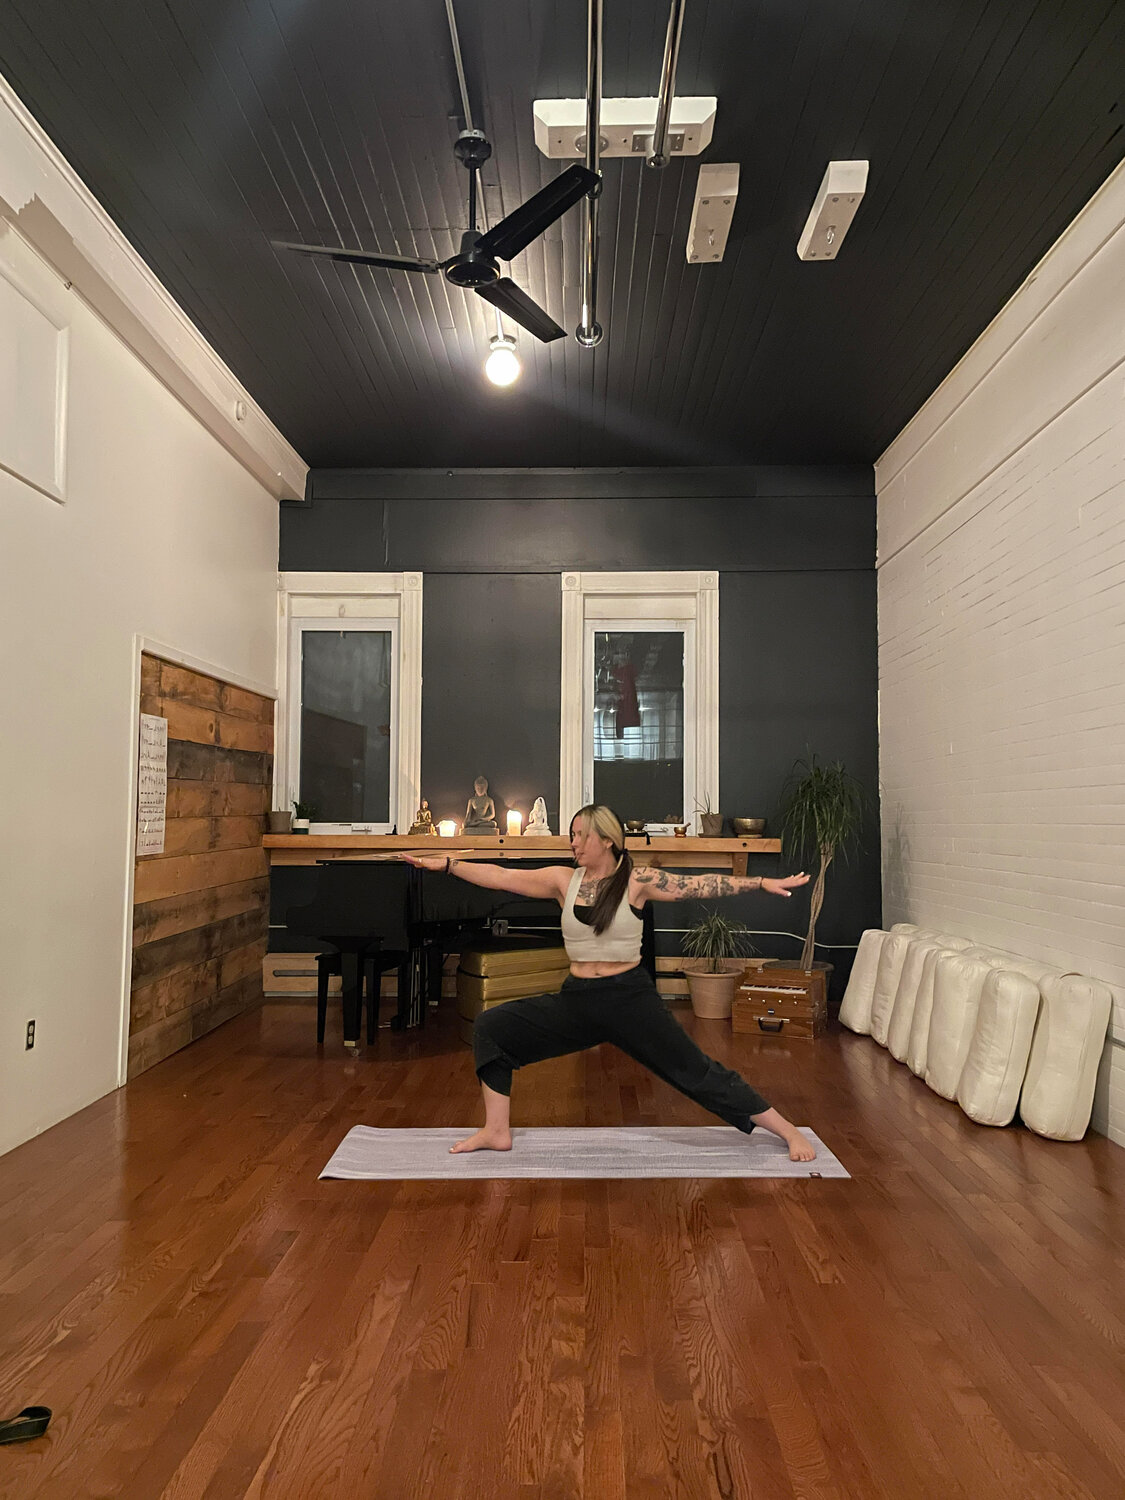 Chi Hive Gym & Wellness instructor Veronica Fernandez guides a Find Your Flow yoga class.